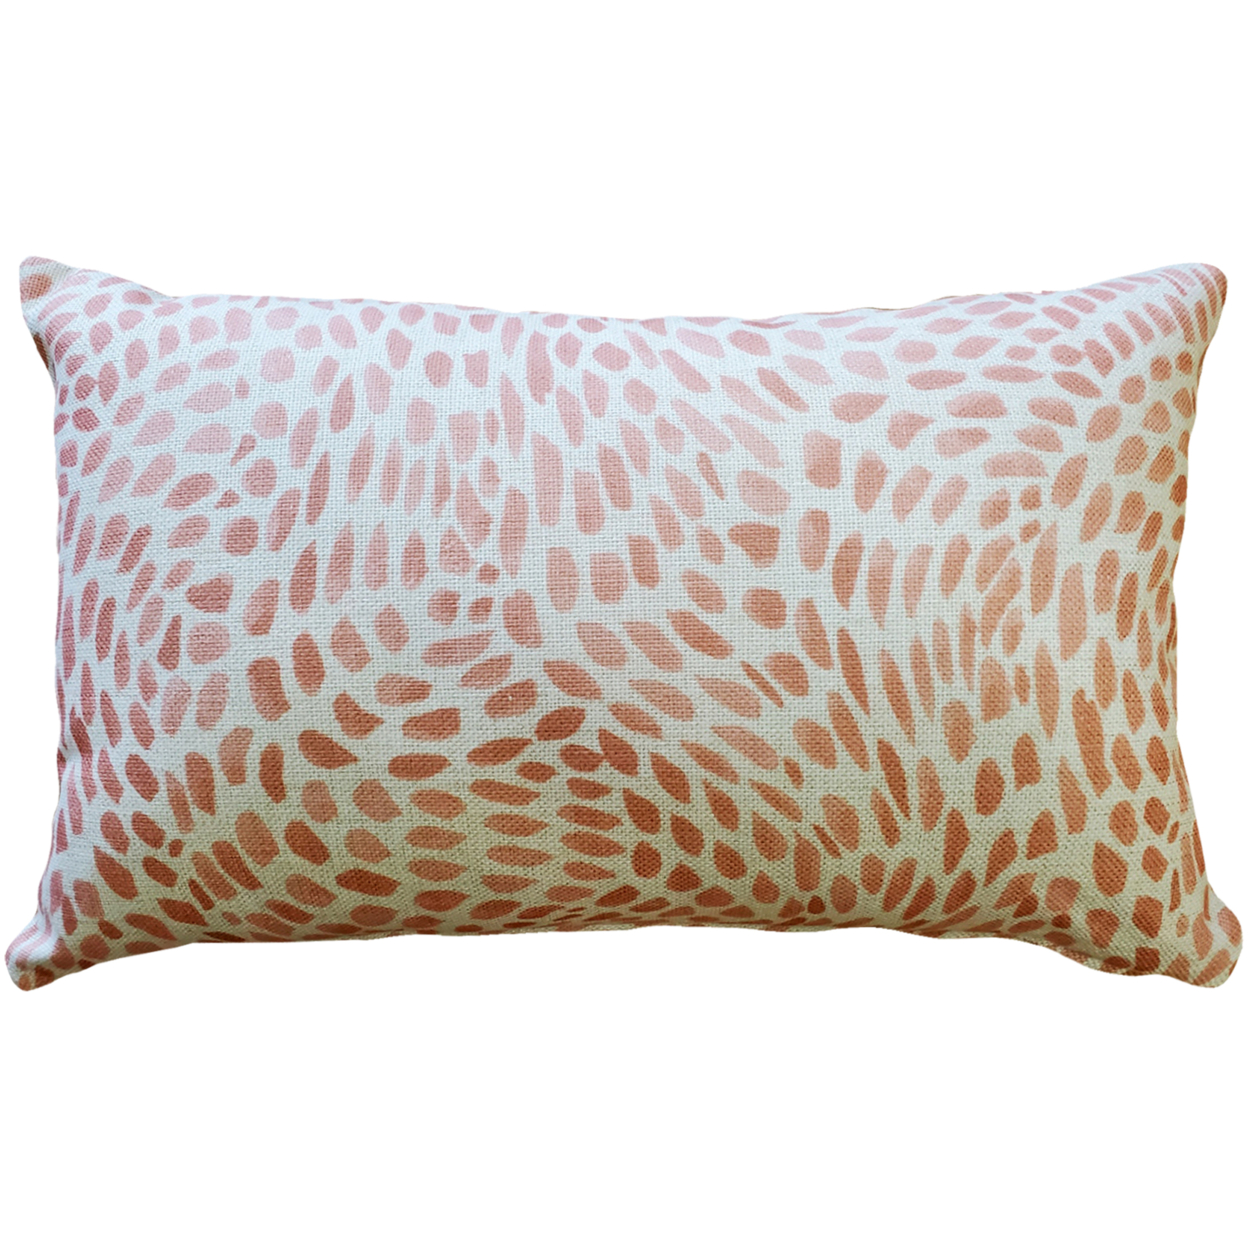 Matisse Dots Coral Pink Throw Pillow 12x19 Inches Square, Complete Pillow With Polyfill Pillow Insert